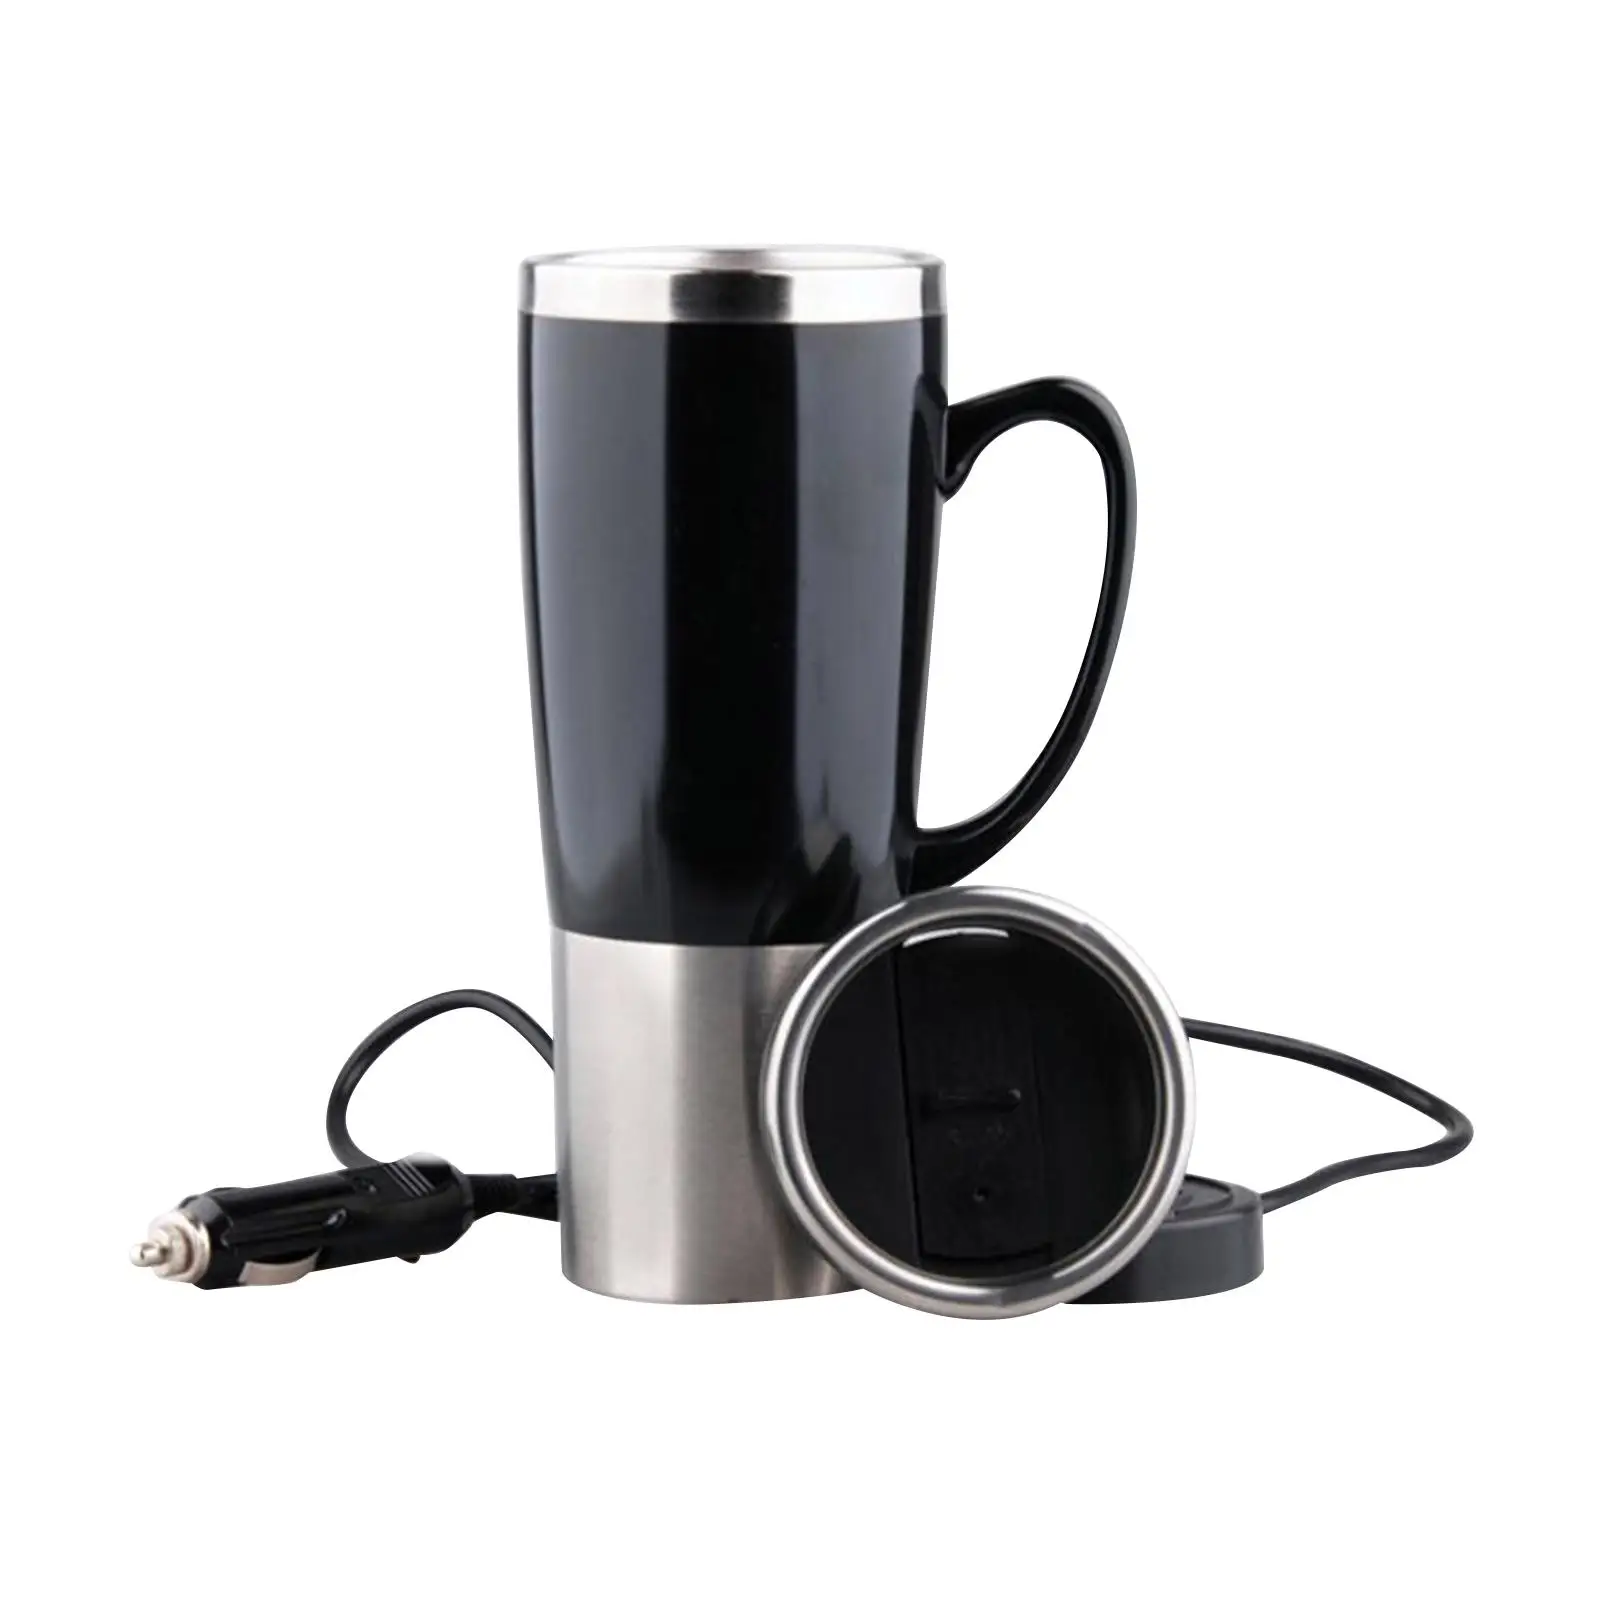 Hot Water Heater Mug for Car Portable Automobile Electric Heating Kettle Stainless Steel Tumbler 12V Electric Heated Travel Mug